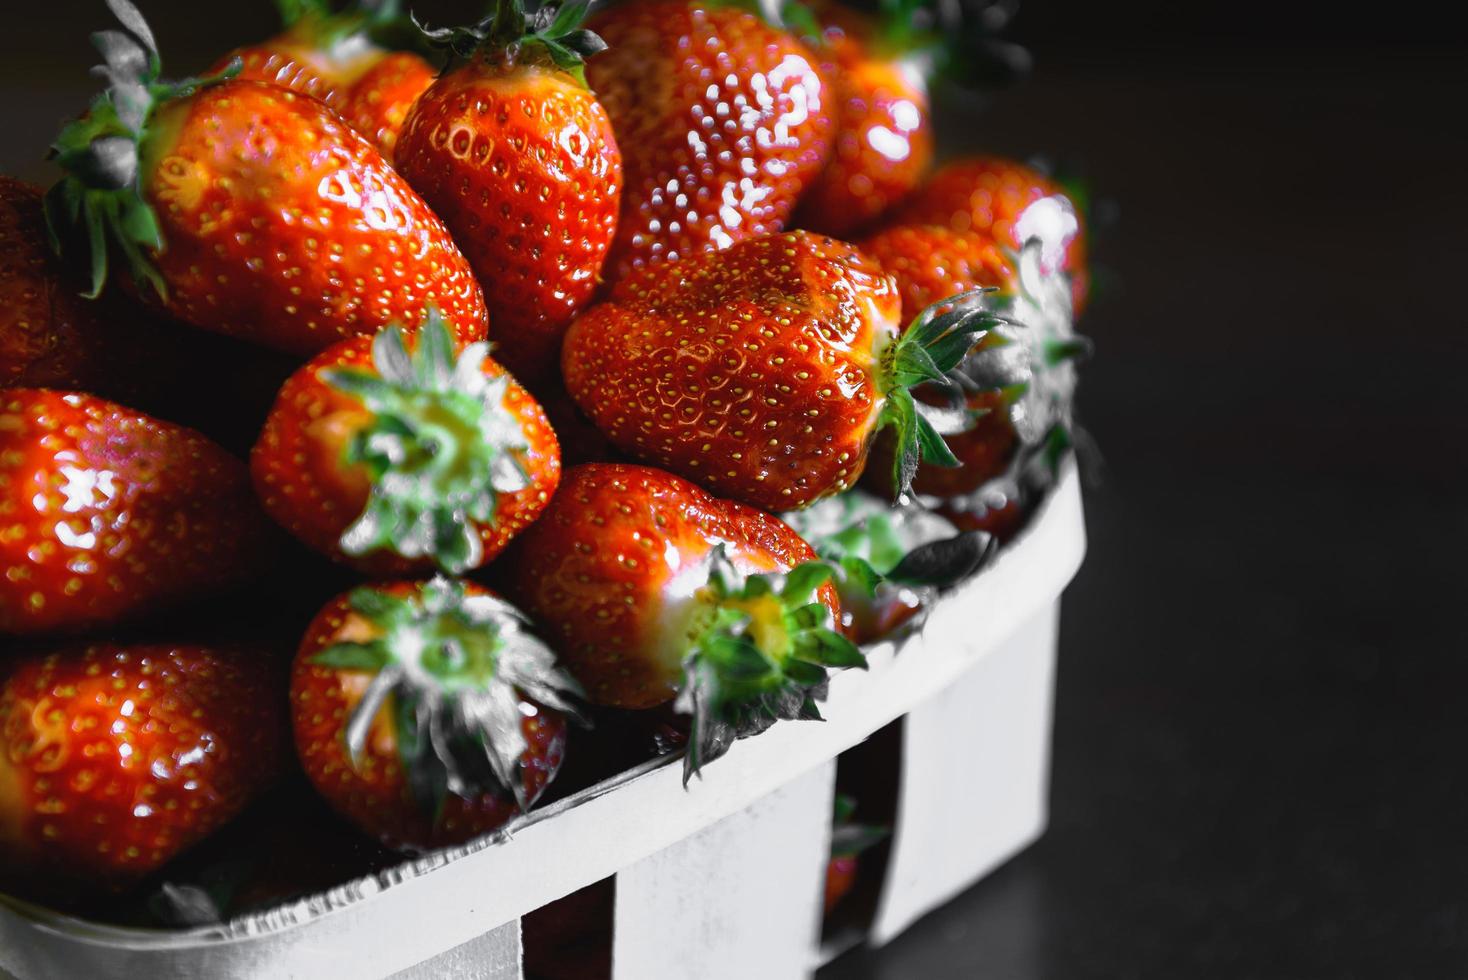 Strawberries on a wooden table photo